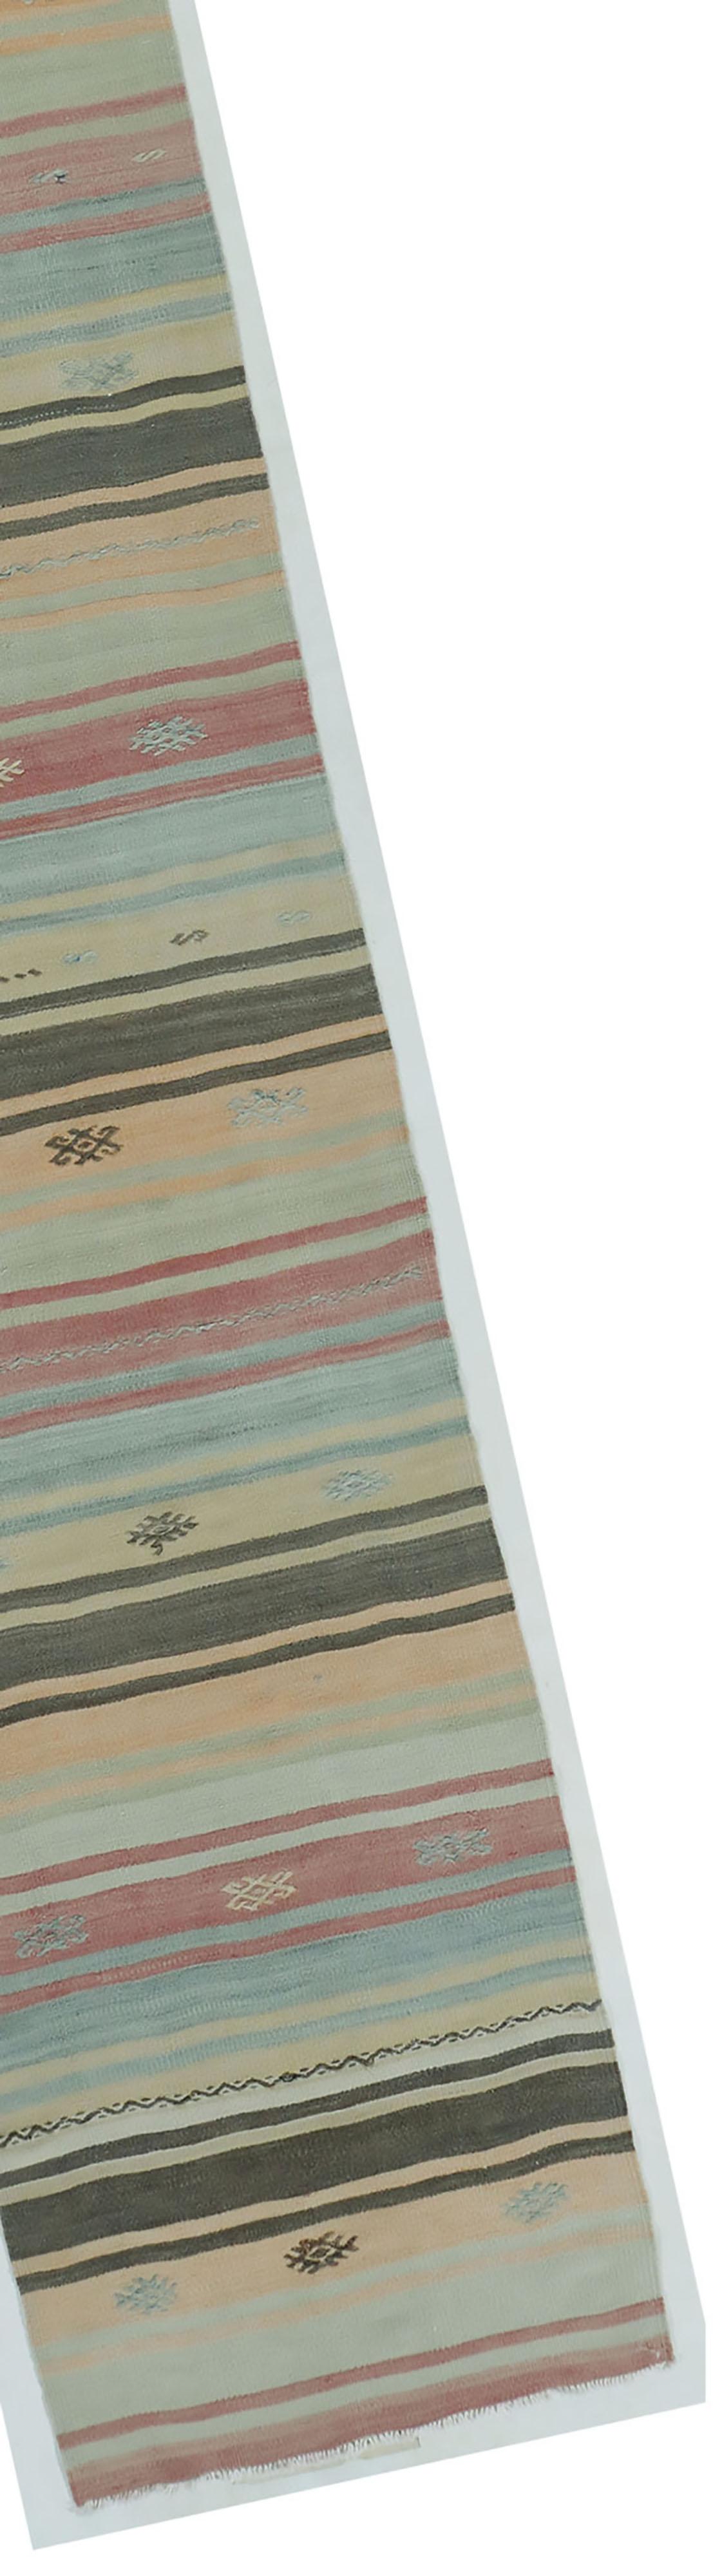 Vintage Turkish Kilim Runner 2'6 X 13'4. A vintage circa 1940s Turkish hand woven hemp Kilim. The simplicity and boldness of this piece gives a contemporary feel and can look at home in both a modern or traditional setting.